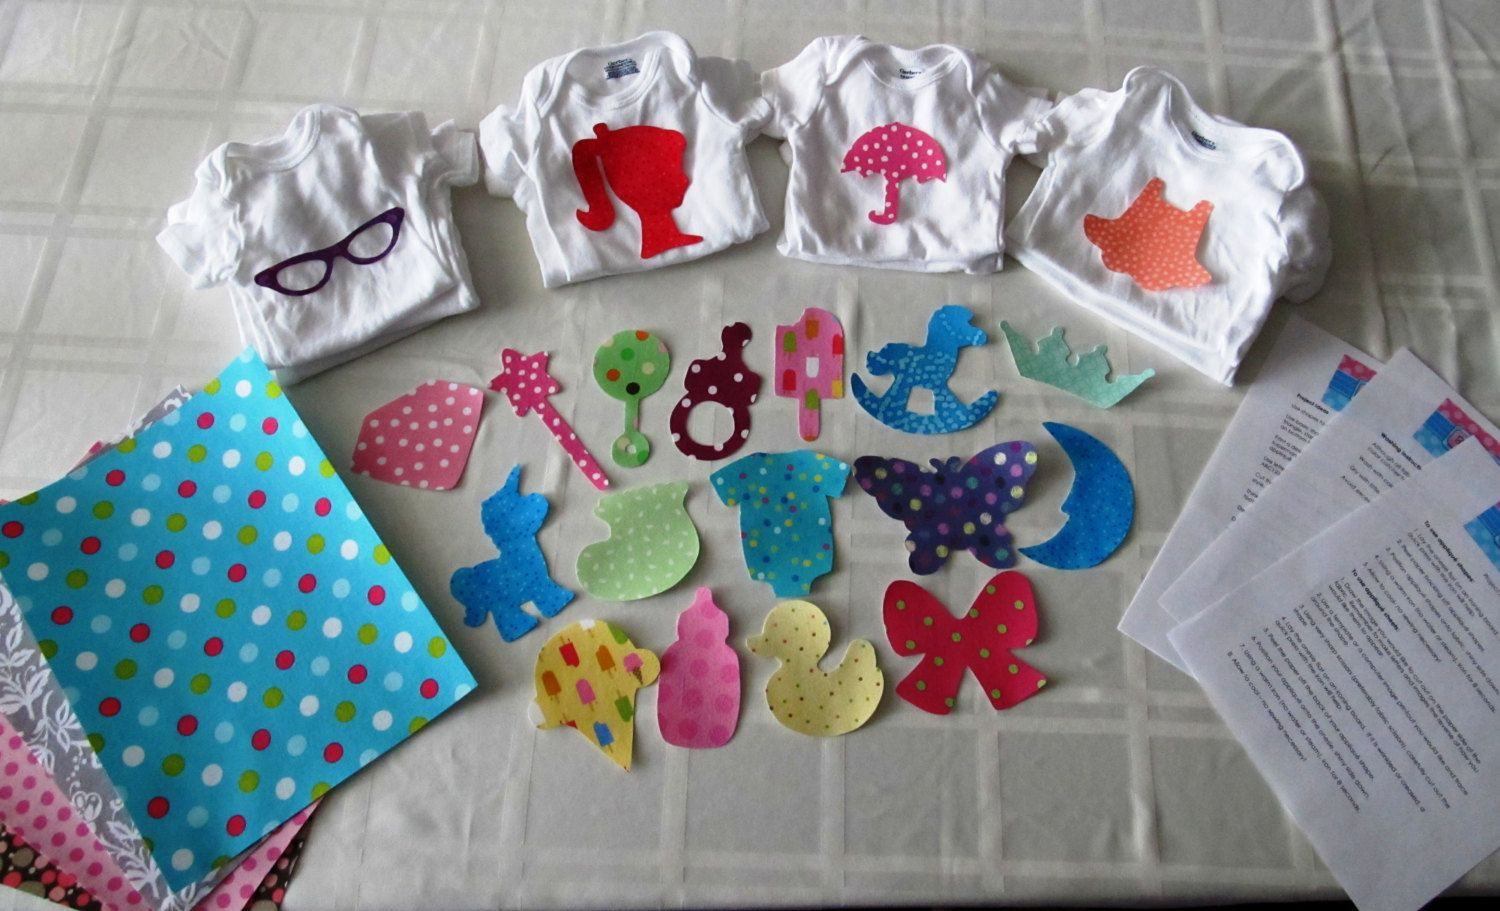 Pinterest Crafts For Baby Showers
 DIY Baby Girl esie Kit Baby Shower craft including